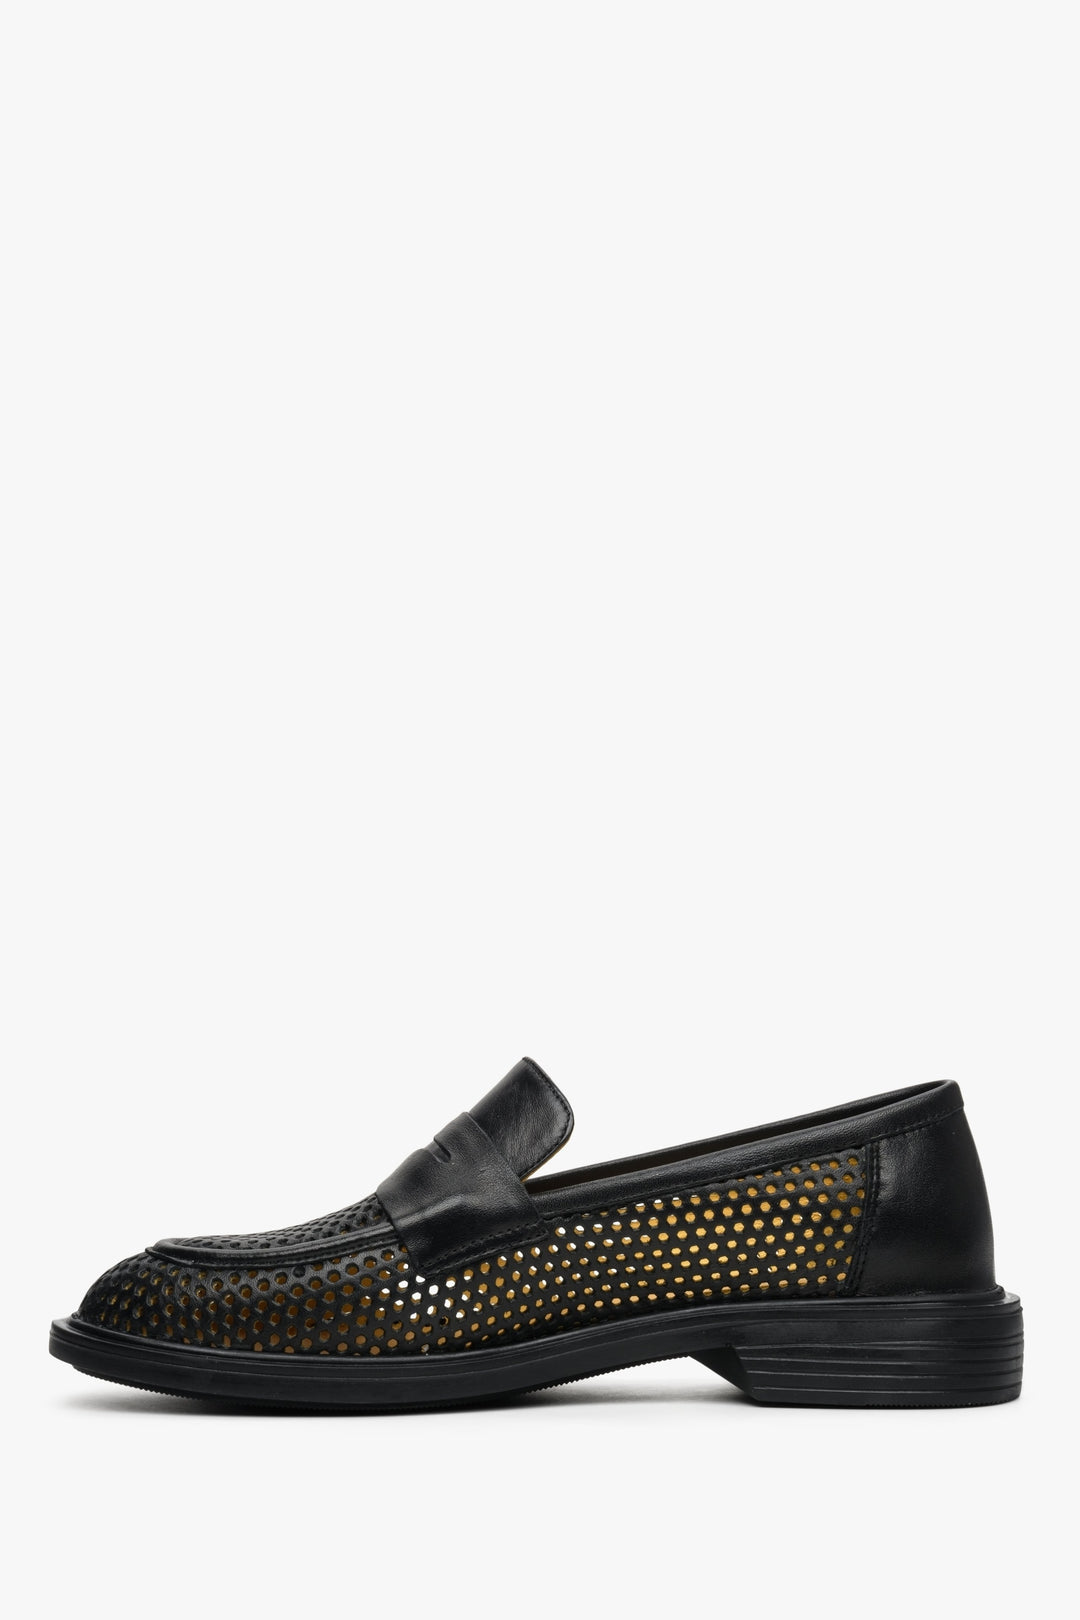 Women's black perforated genuine leather loafers for fall by Estro - shoe profile.